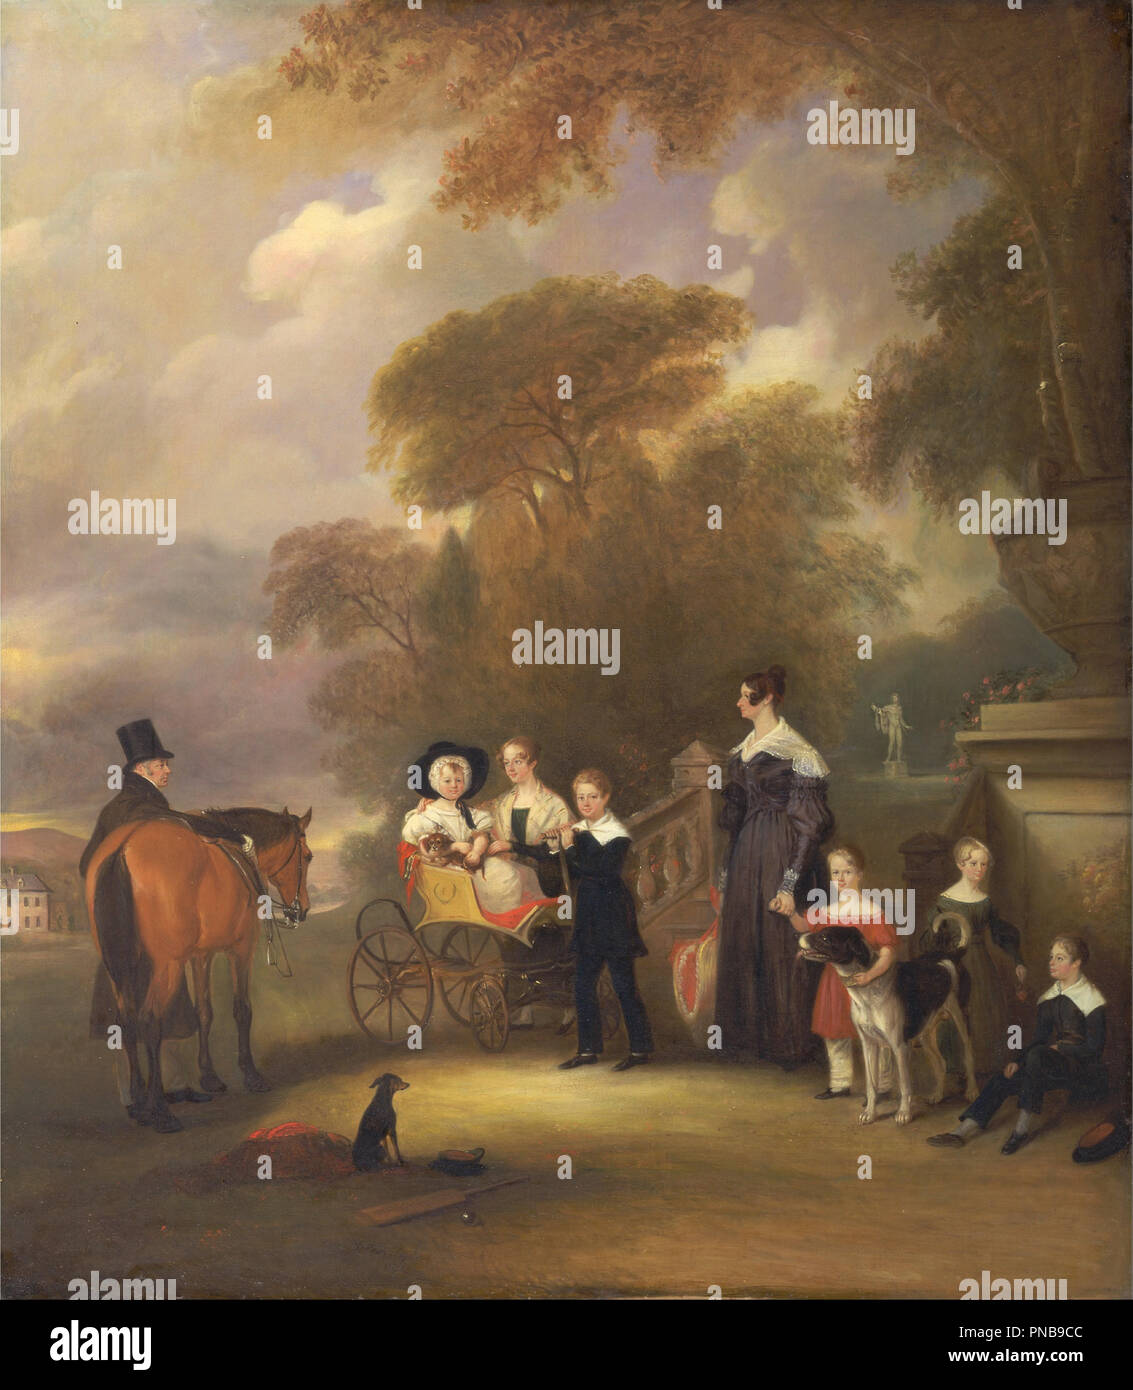 The Rev. and Mrs. Henry Palmer with their six younger children at Withcote Hall, Near Oakham, Leicestershire. Date/Period: 1838. Painting. Oil on canvas. Height: 1,321 mm (52 in); Width: 1,168 mm (45.98 in). Author: John Ferneley. Stock Photo